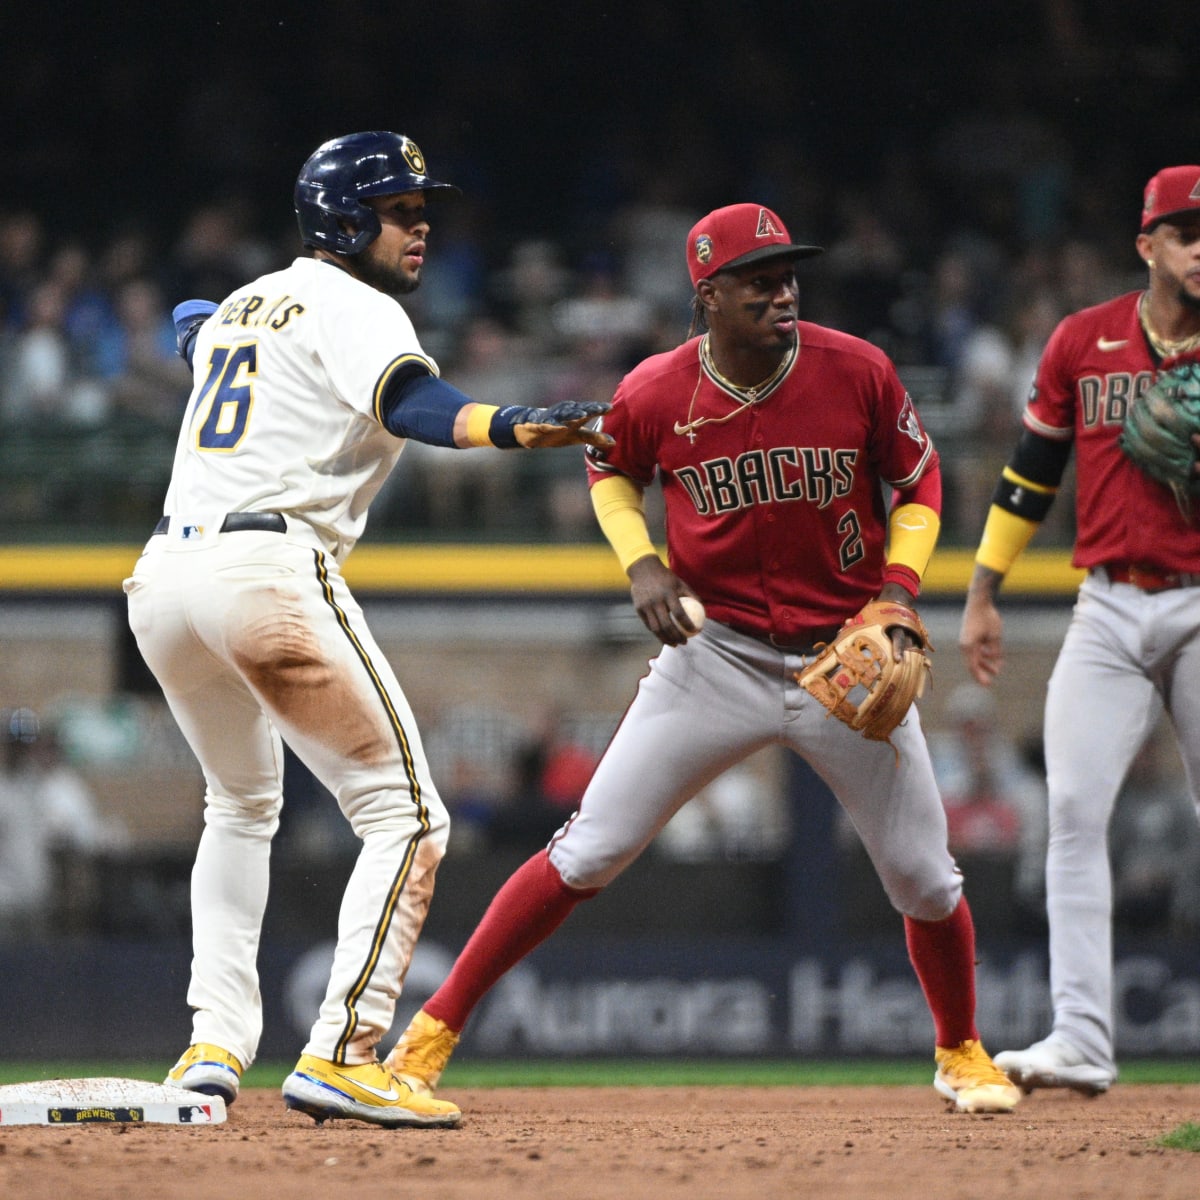 Evan Longoria dive gives D-backs' double-play, strands Brewers